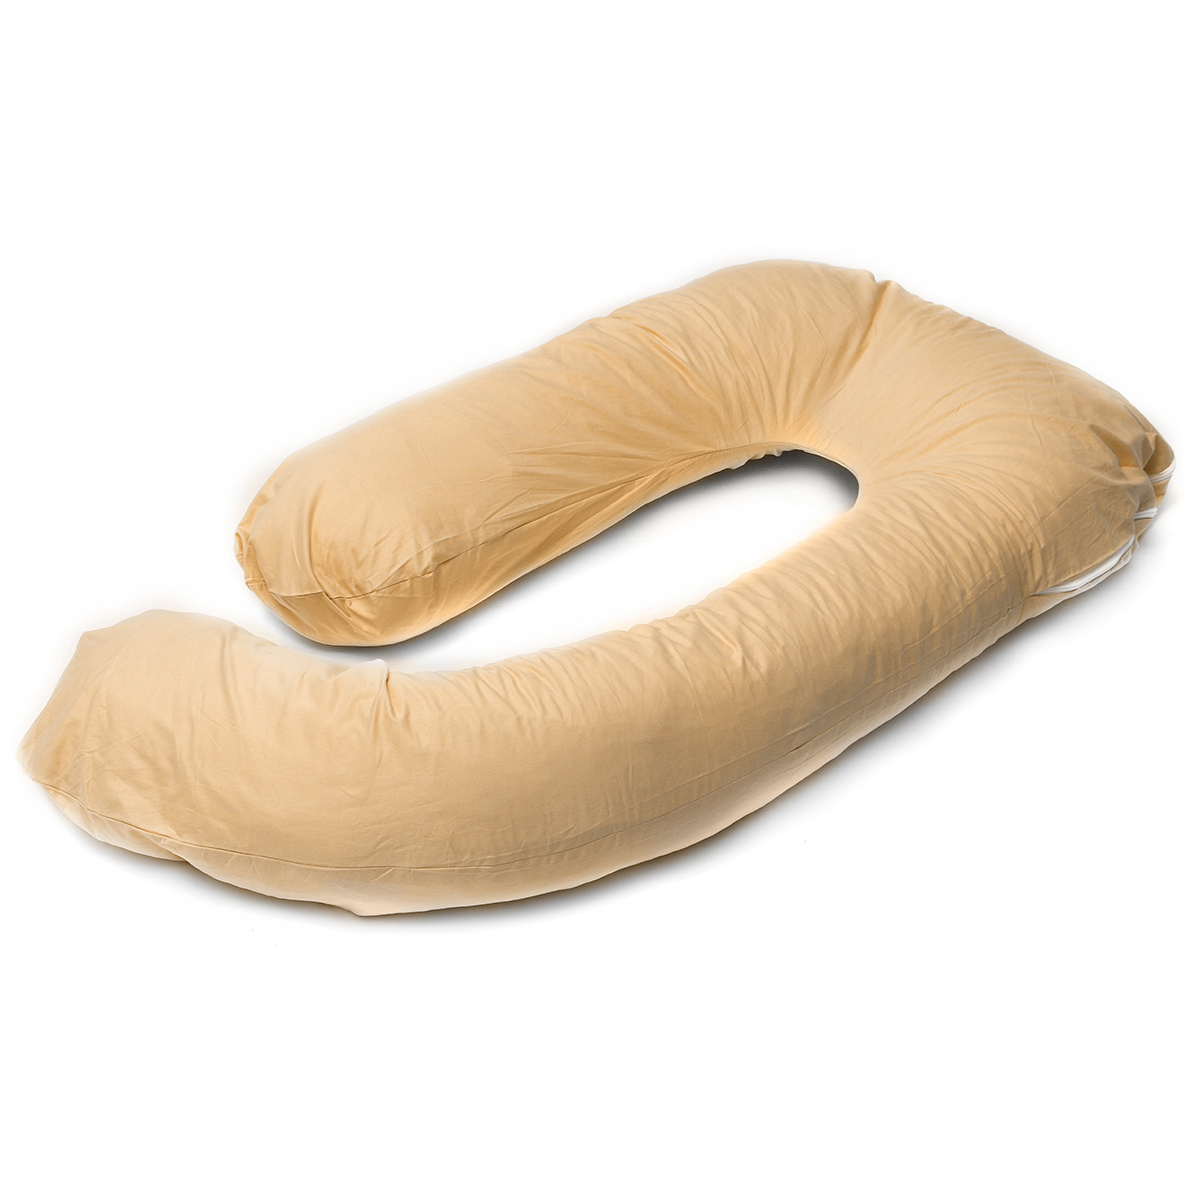 Multi-functional-Mother-Pillow-Side-Sleeper-Pure-Cotton-Removable-Washable-U-shaped-Napping-Pillowca-1809583-8